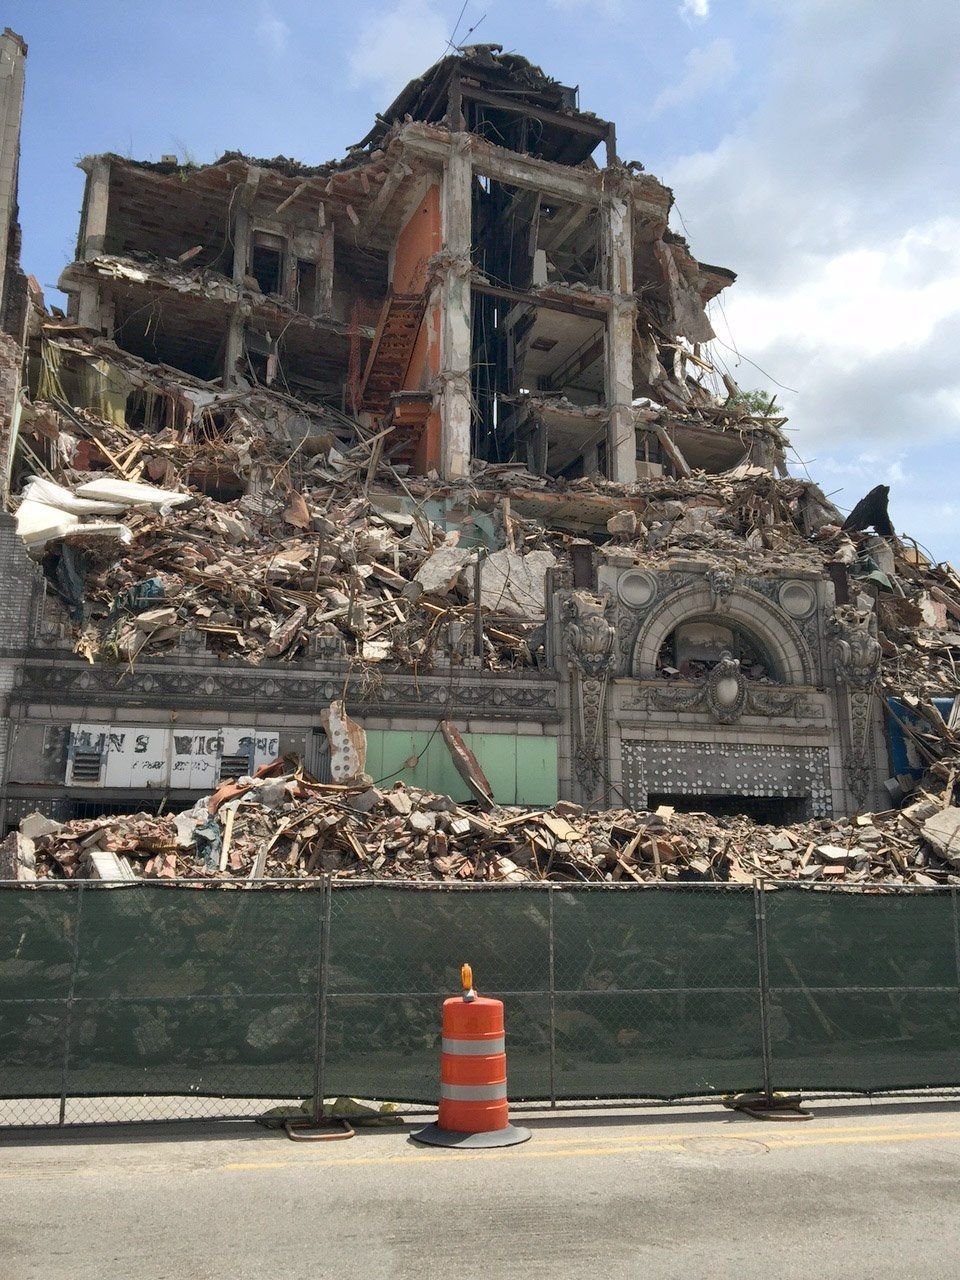 Landmark Murphy Building in East St. Louis largely reduced to rubble | Illinois | www.bagssaleusa.com